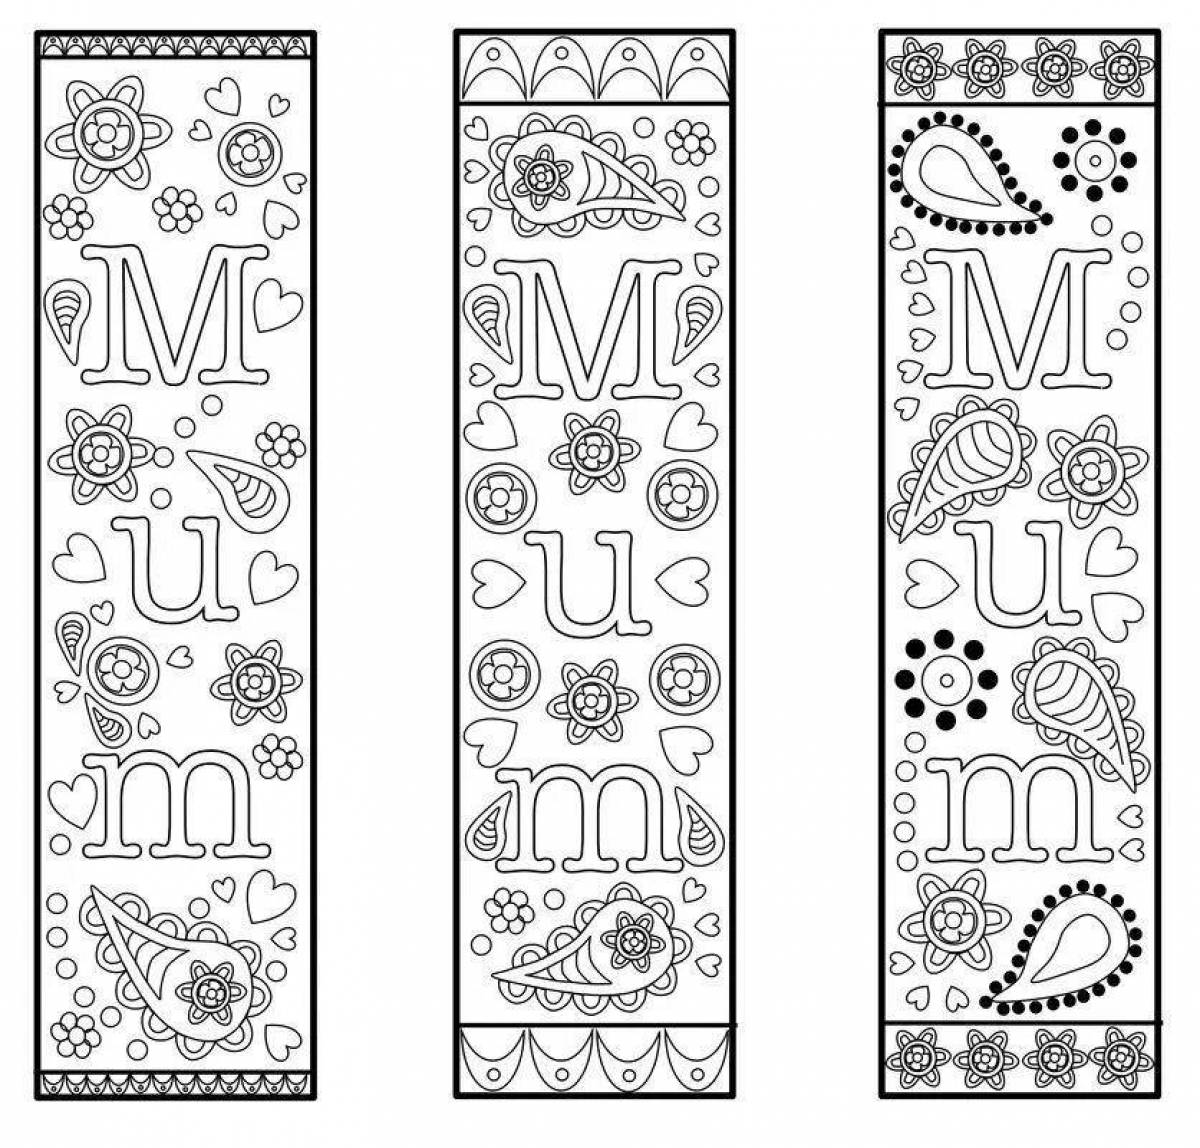 Creative coloring bookmarks for books